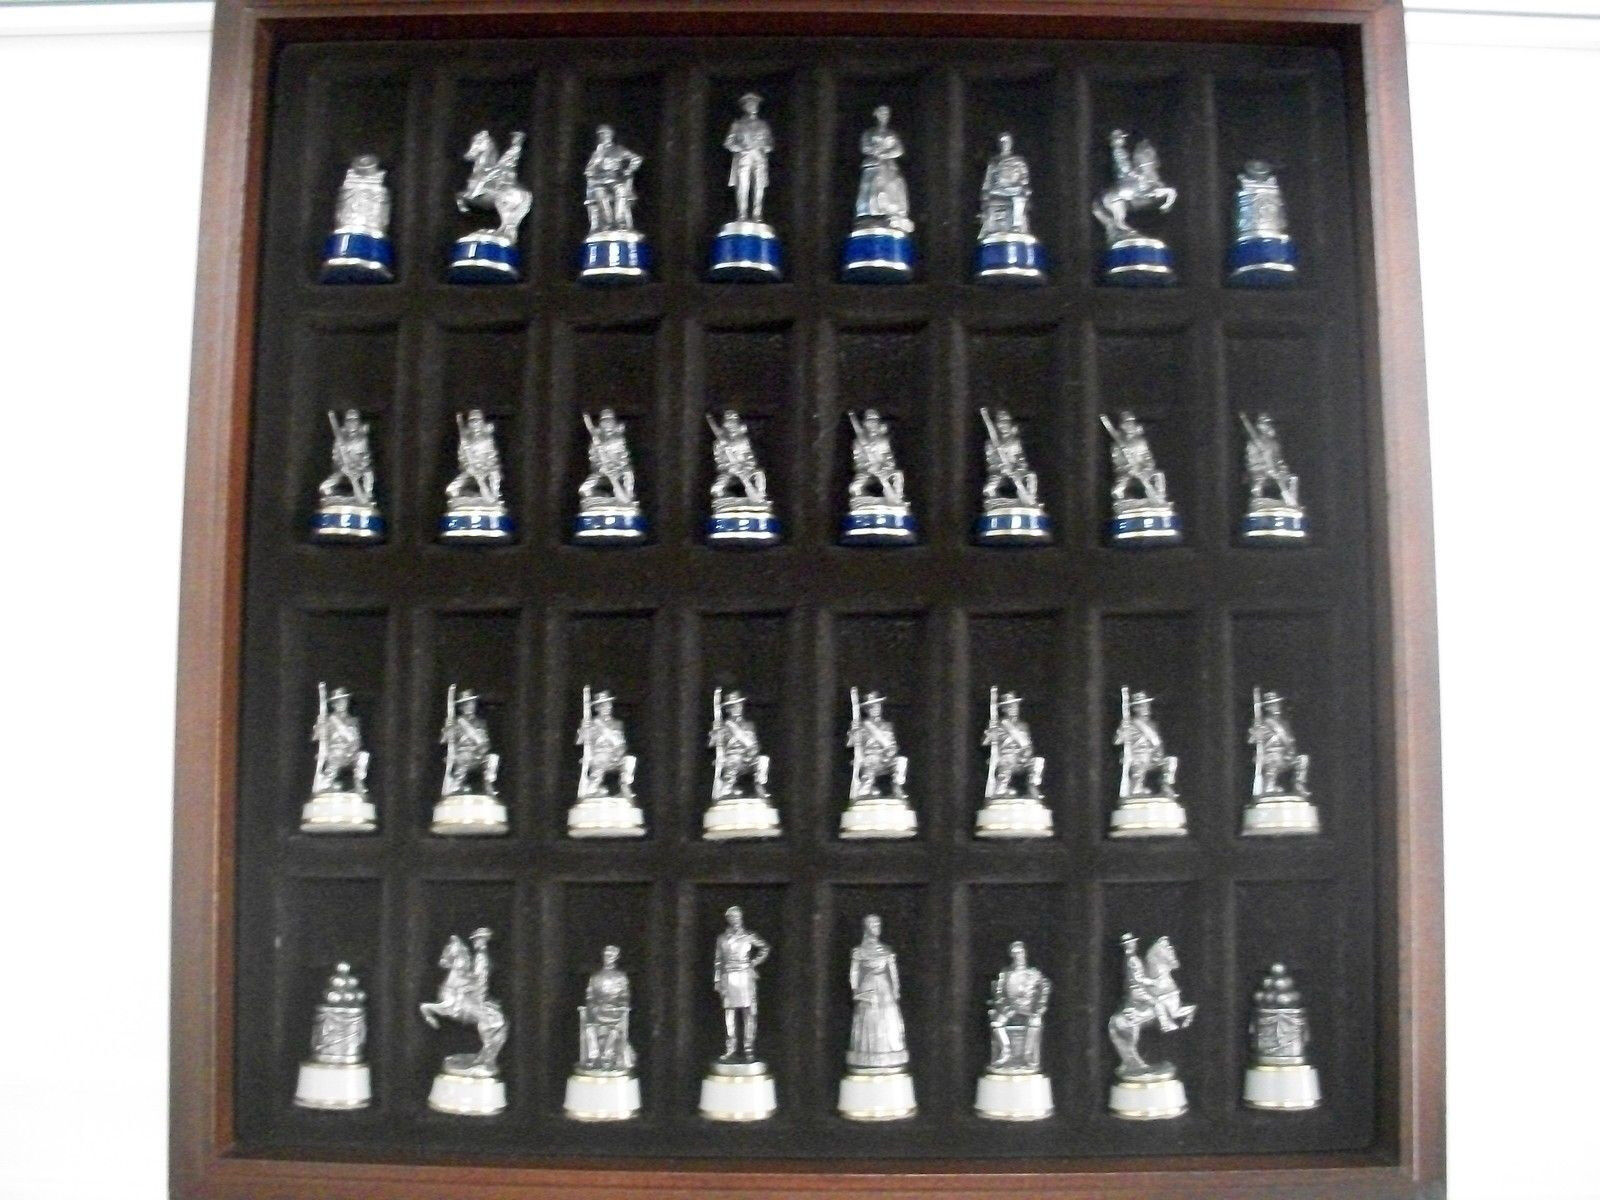 FRANKLIN MINT CIVIL WAR CHESS SET EXCELLENT EARLY EDITION VERY CLEAN